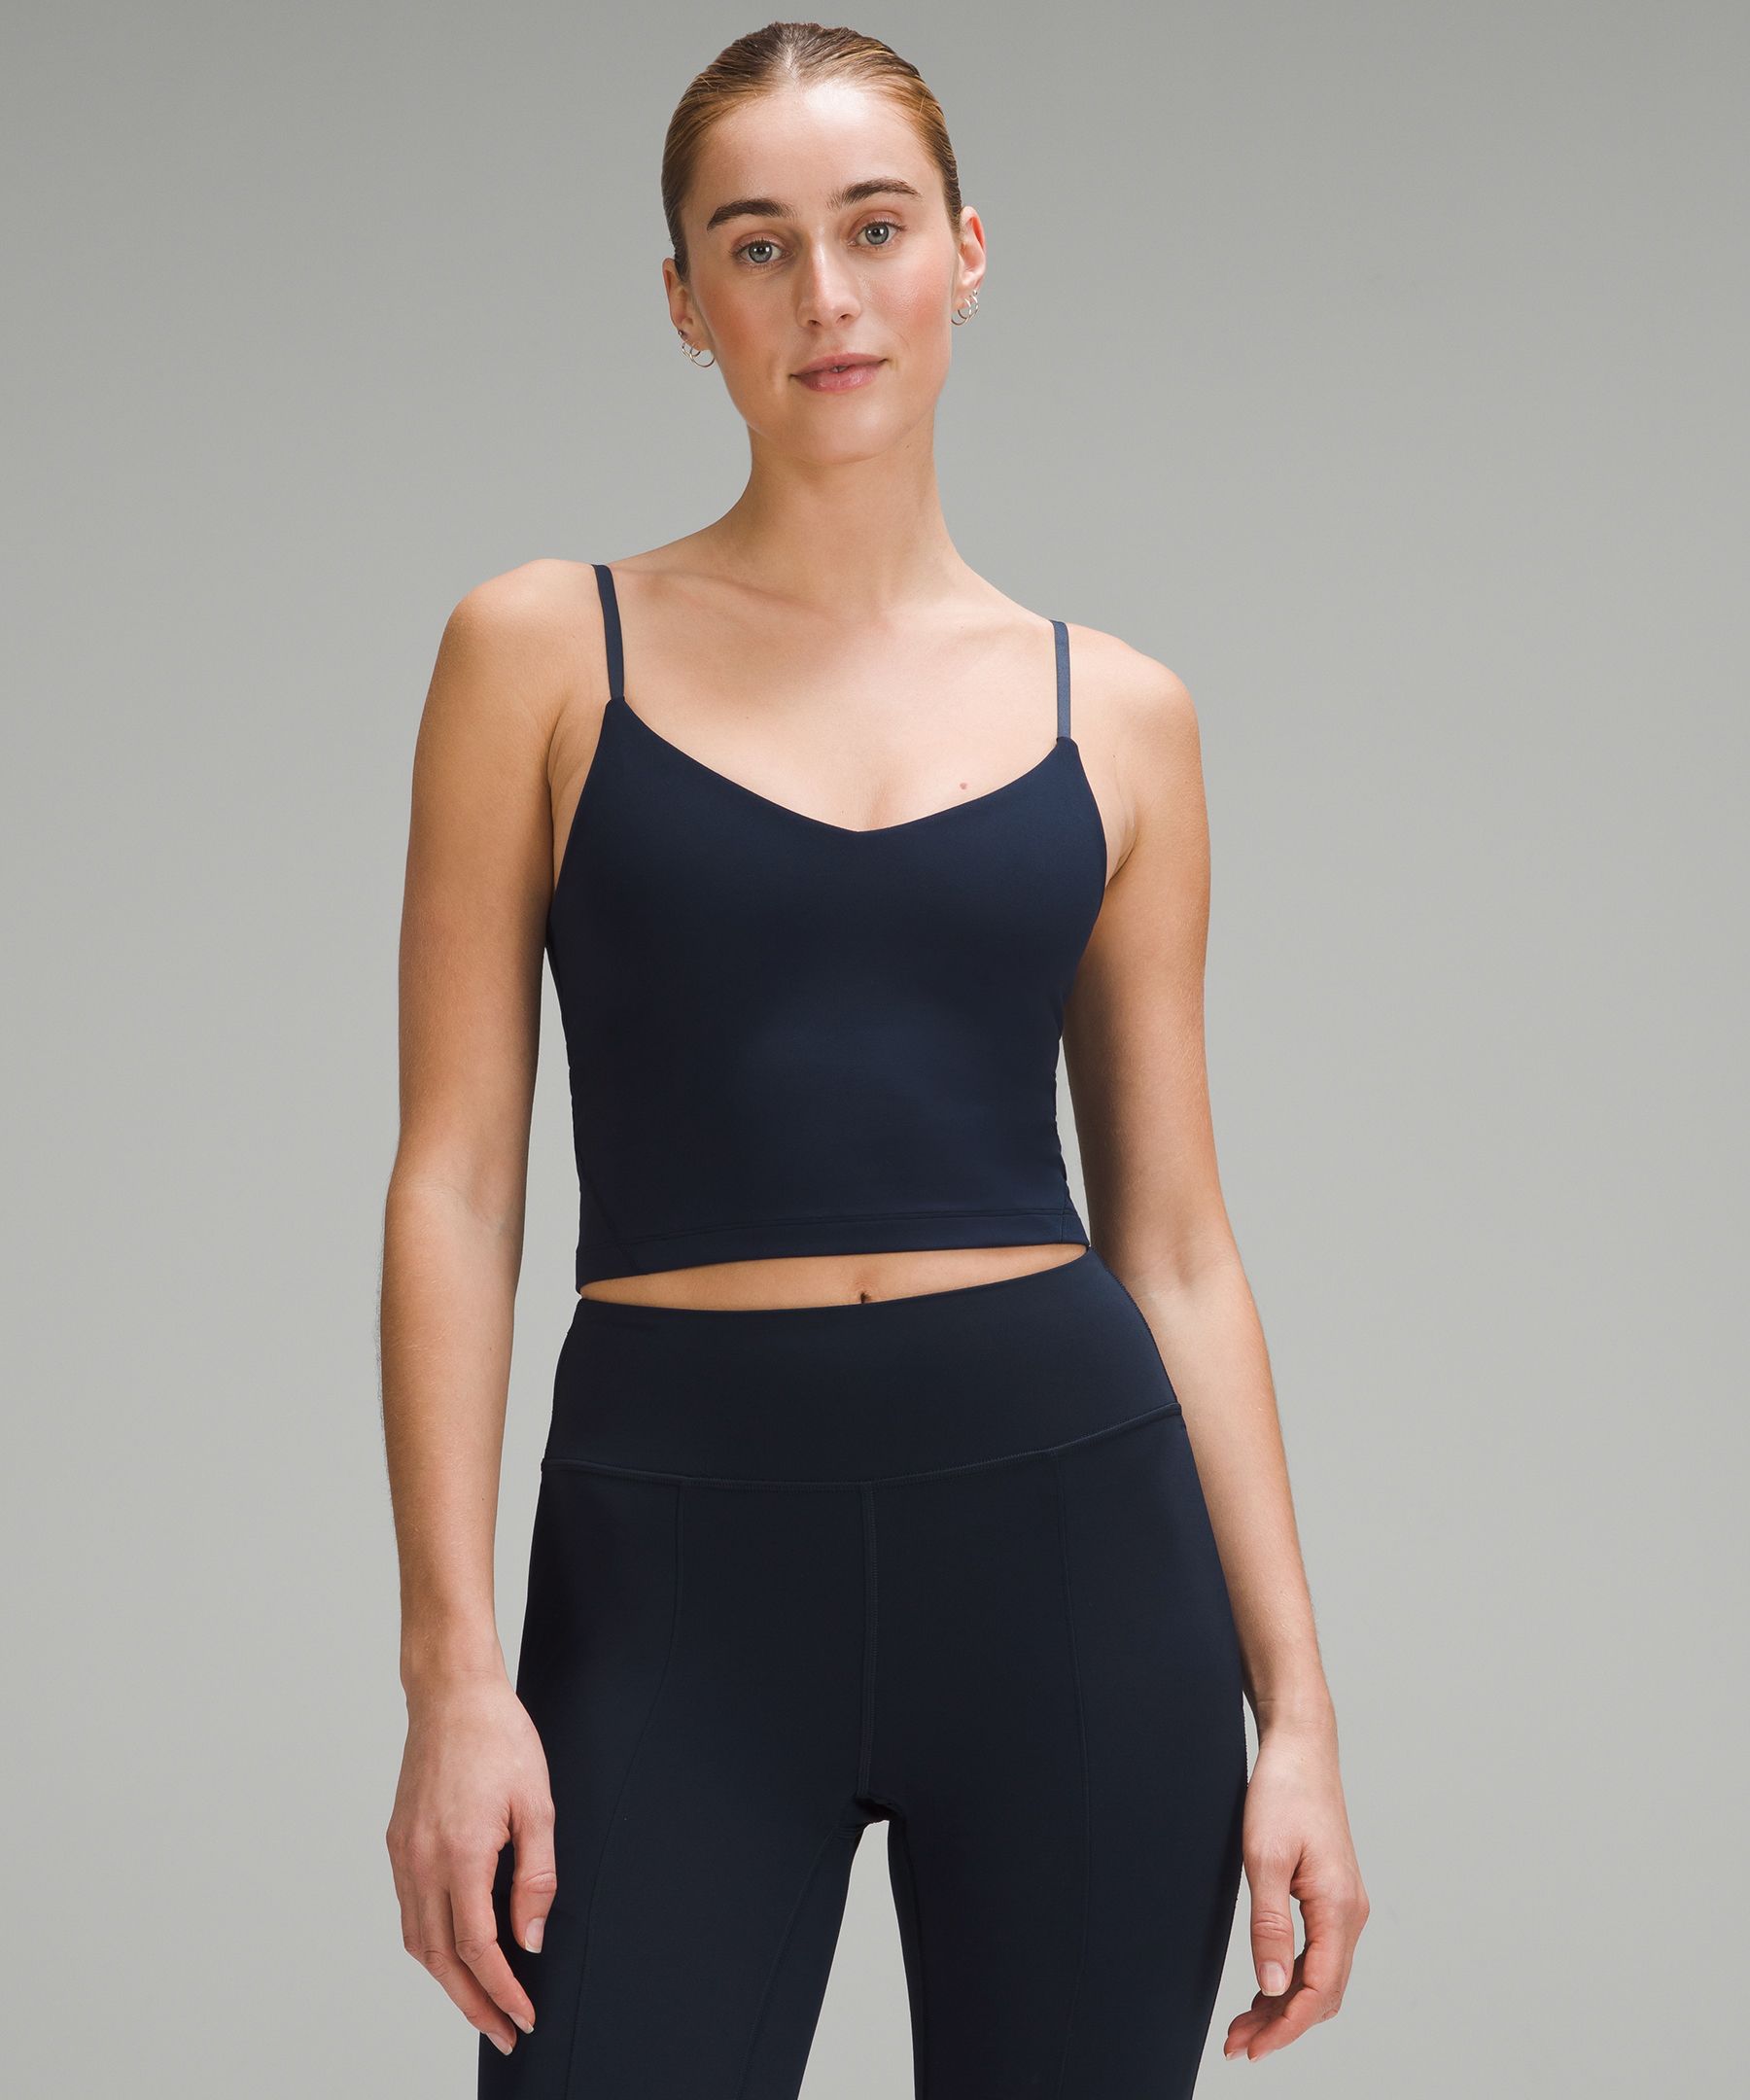 Lululemon Sale Canada Women's Clothing  International Society of Precision  Agriculture